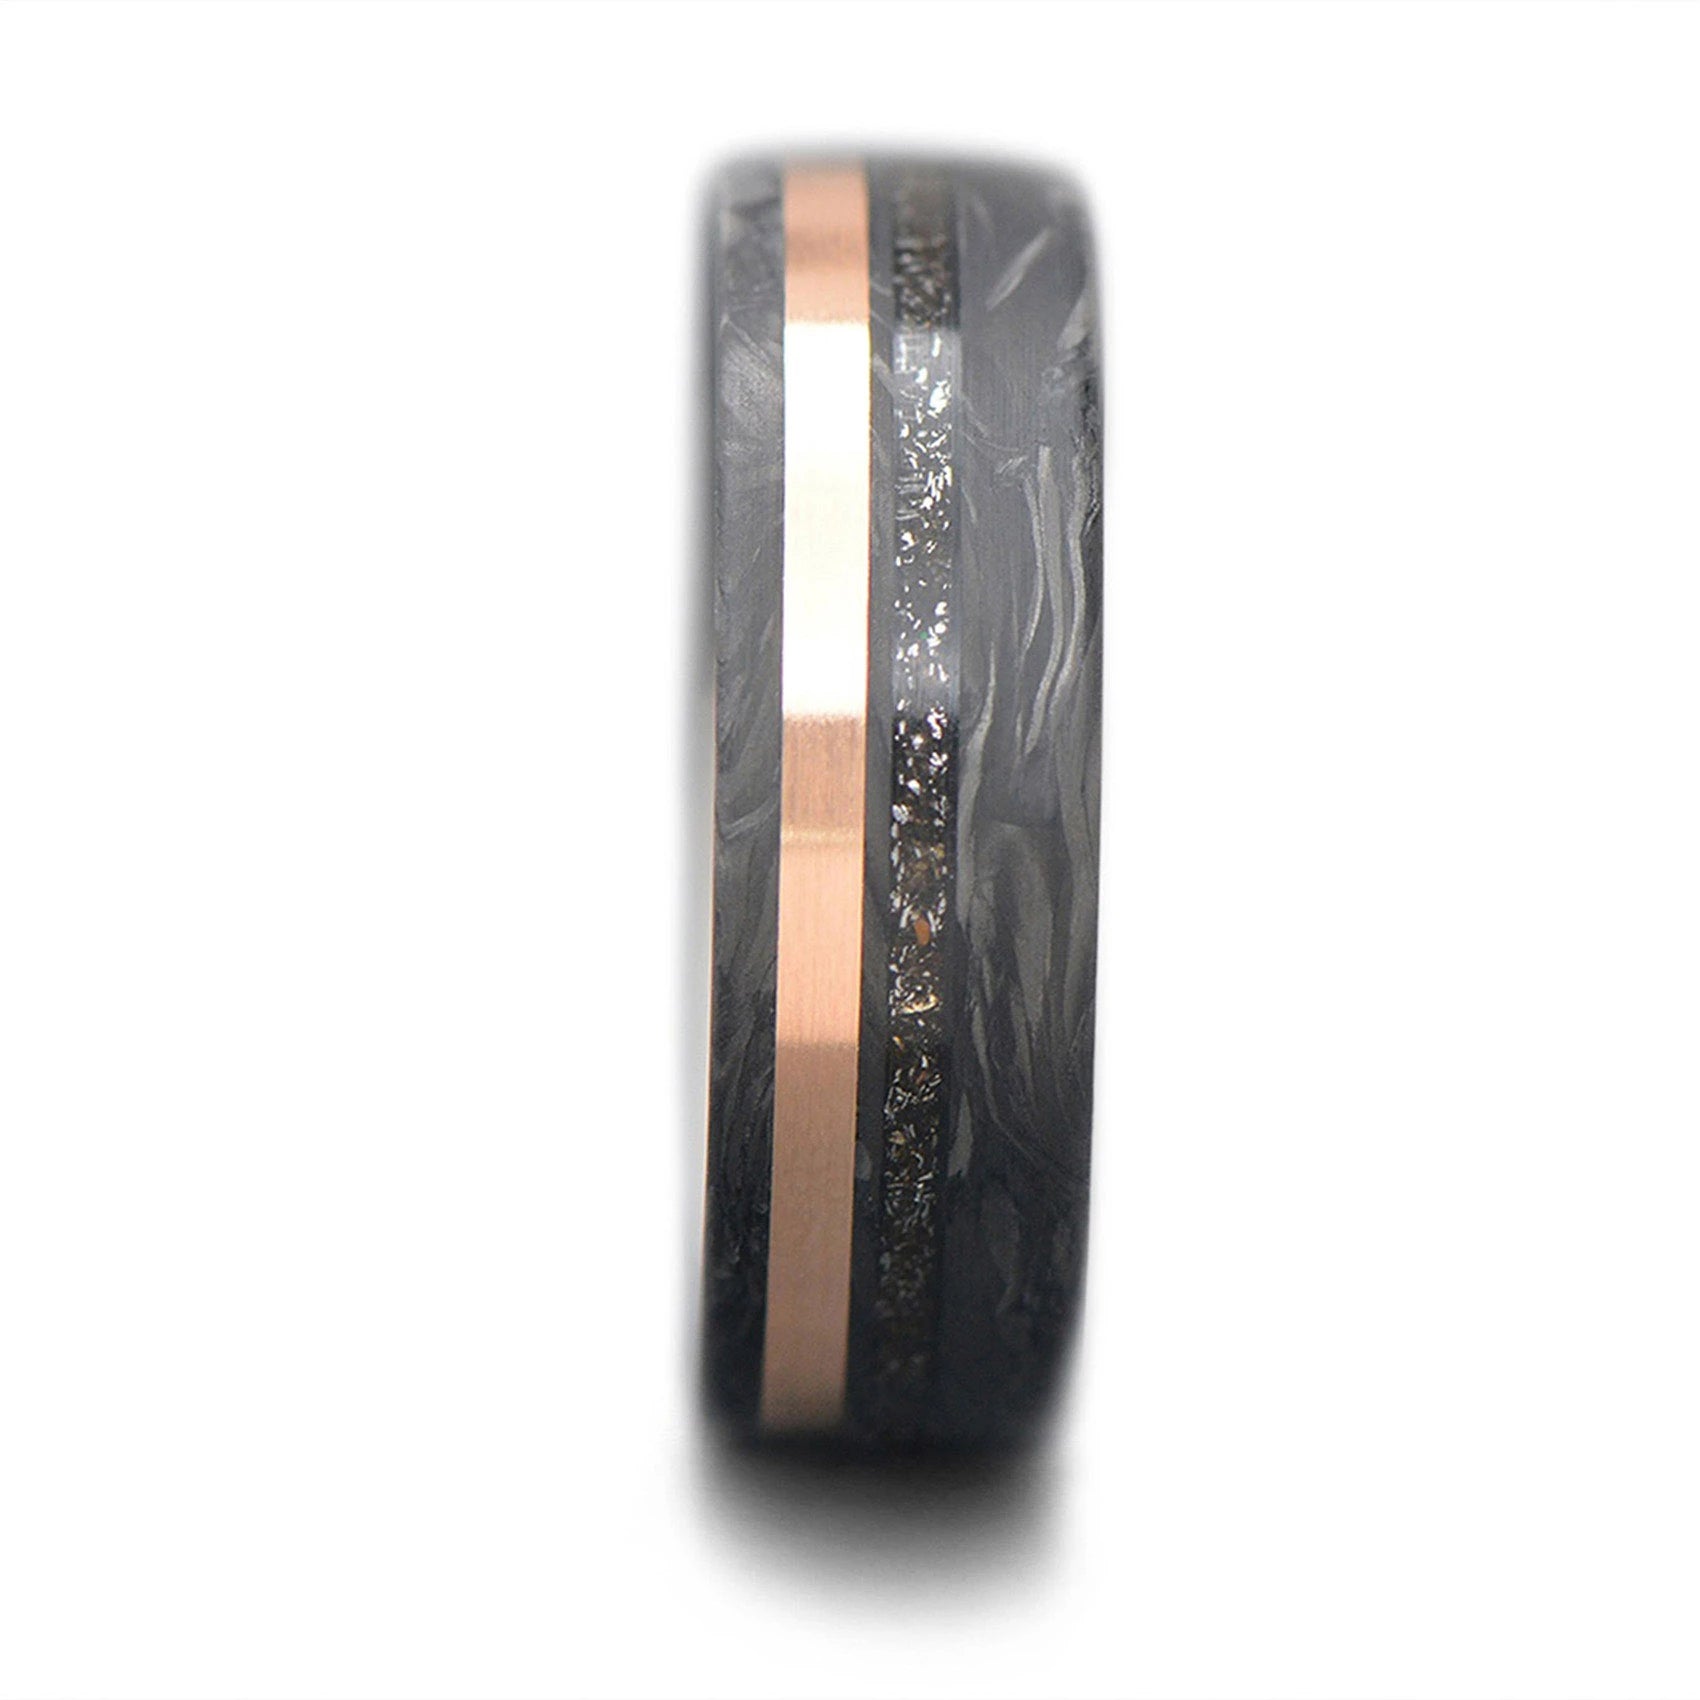 CarbonForged Core Ring with Meteorite, Rose Gold inlay and Titanium inner sleeve, 7mm -THE ODYSSEY